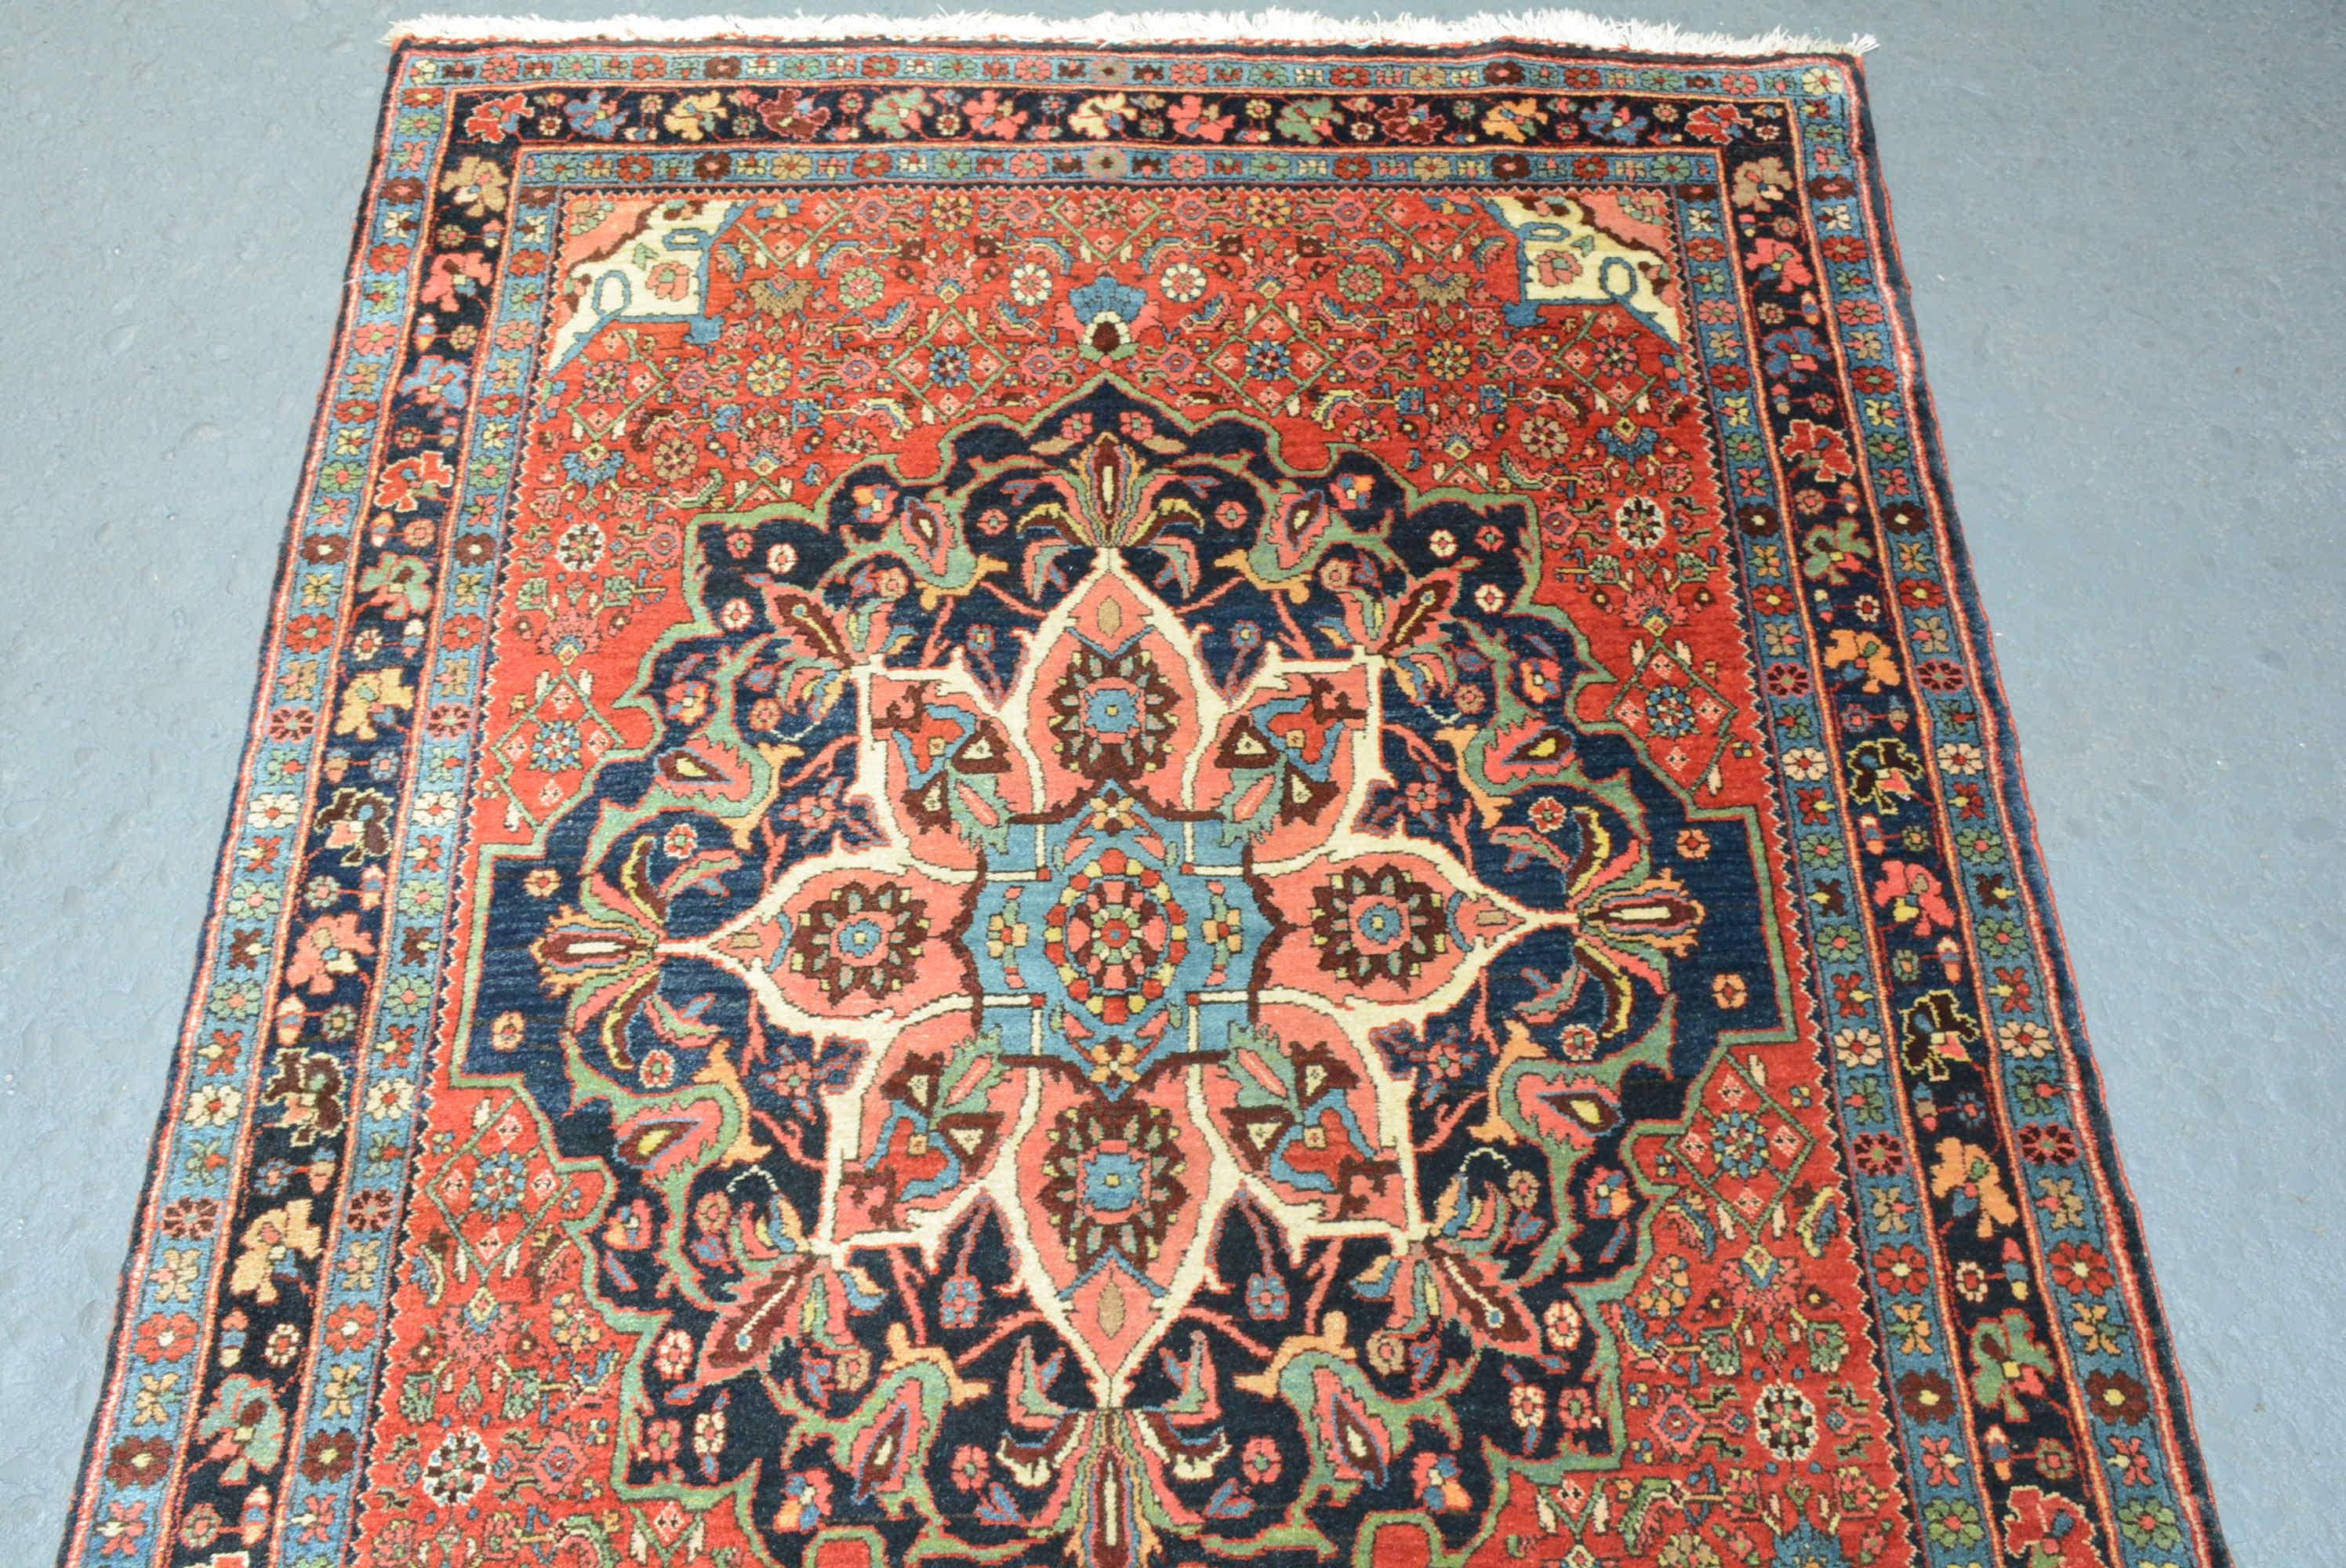 A Bidjar Rug from northern Persia, circa 1925 with a dramatic central floral medallion on a scarlet field measuring 5' 3